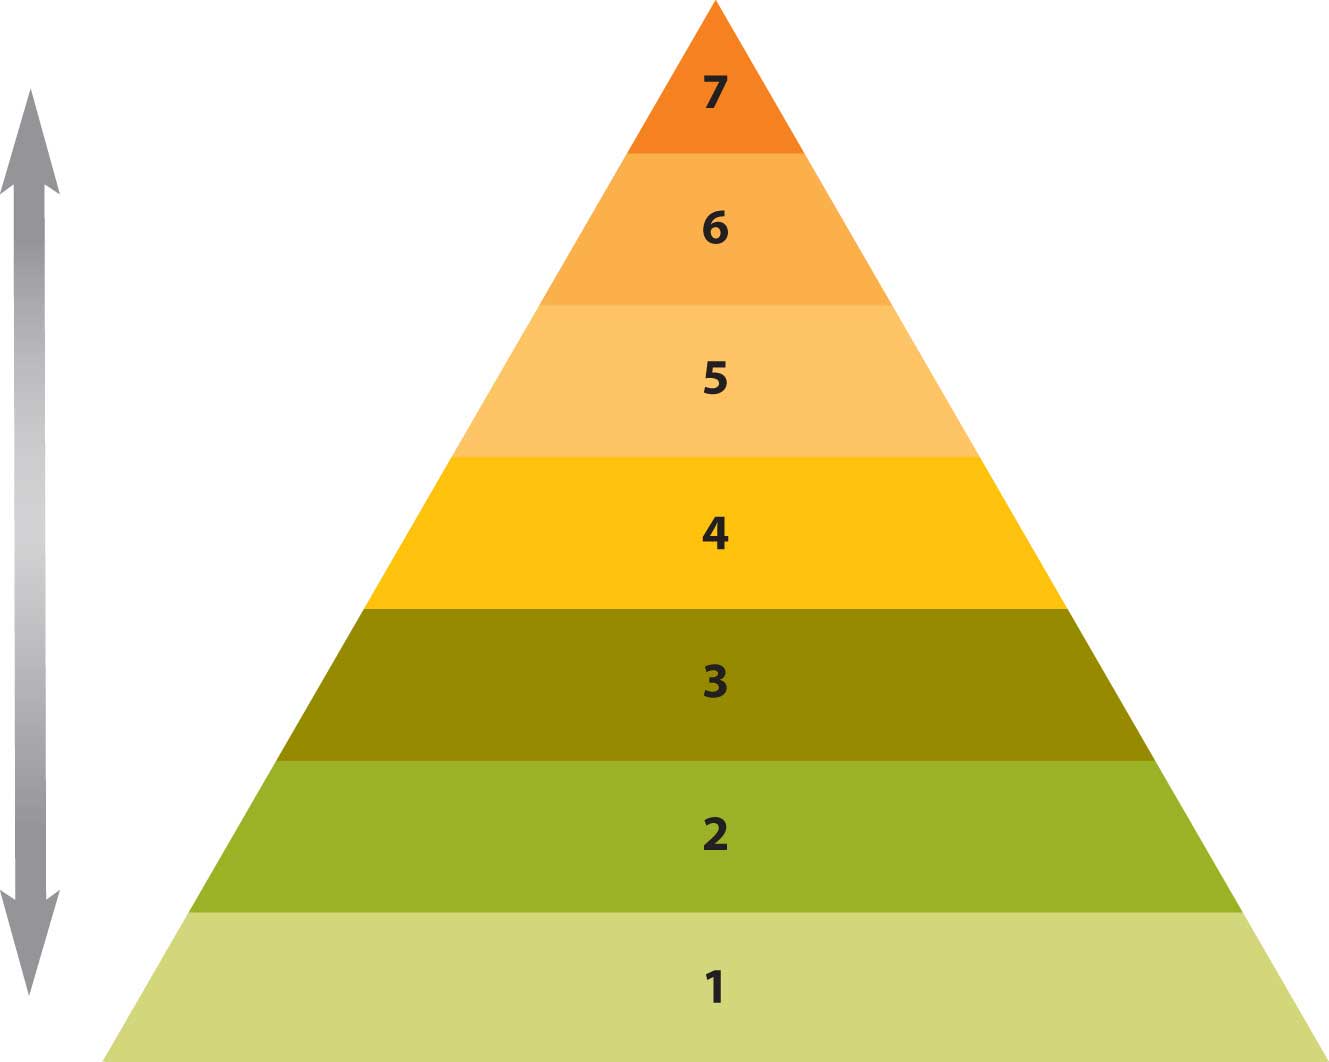 Maslow's Hierarchy. A triangle with 1 at the bottom, and 7 at the top